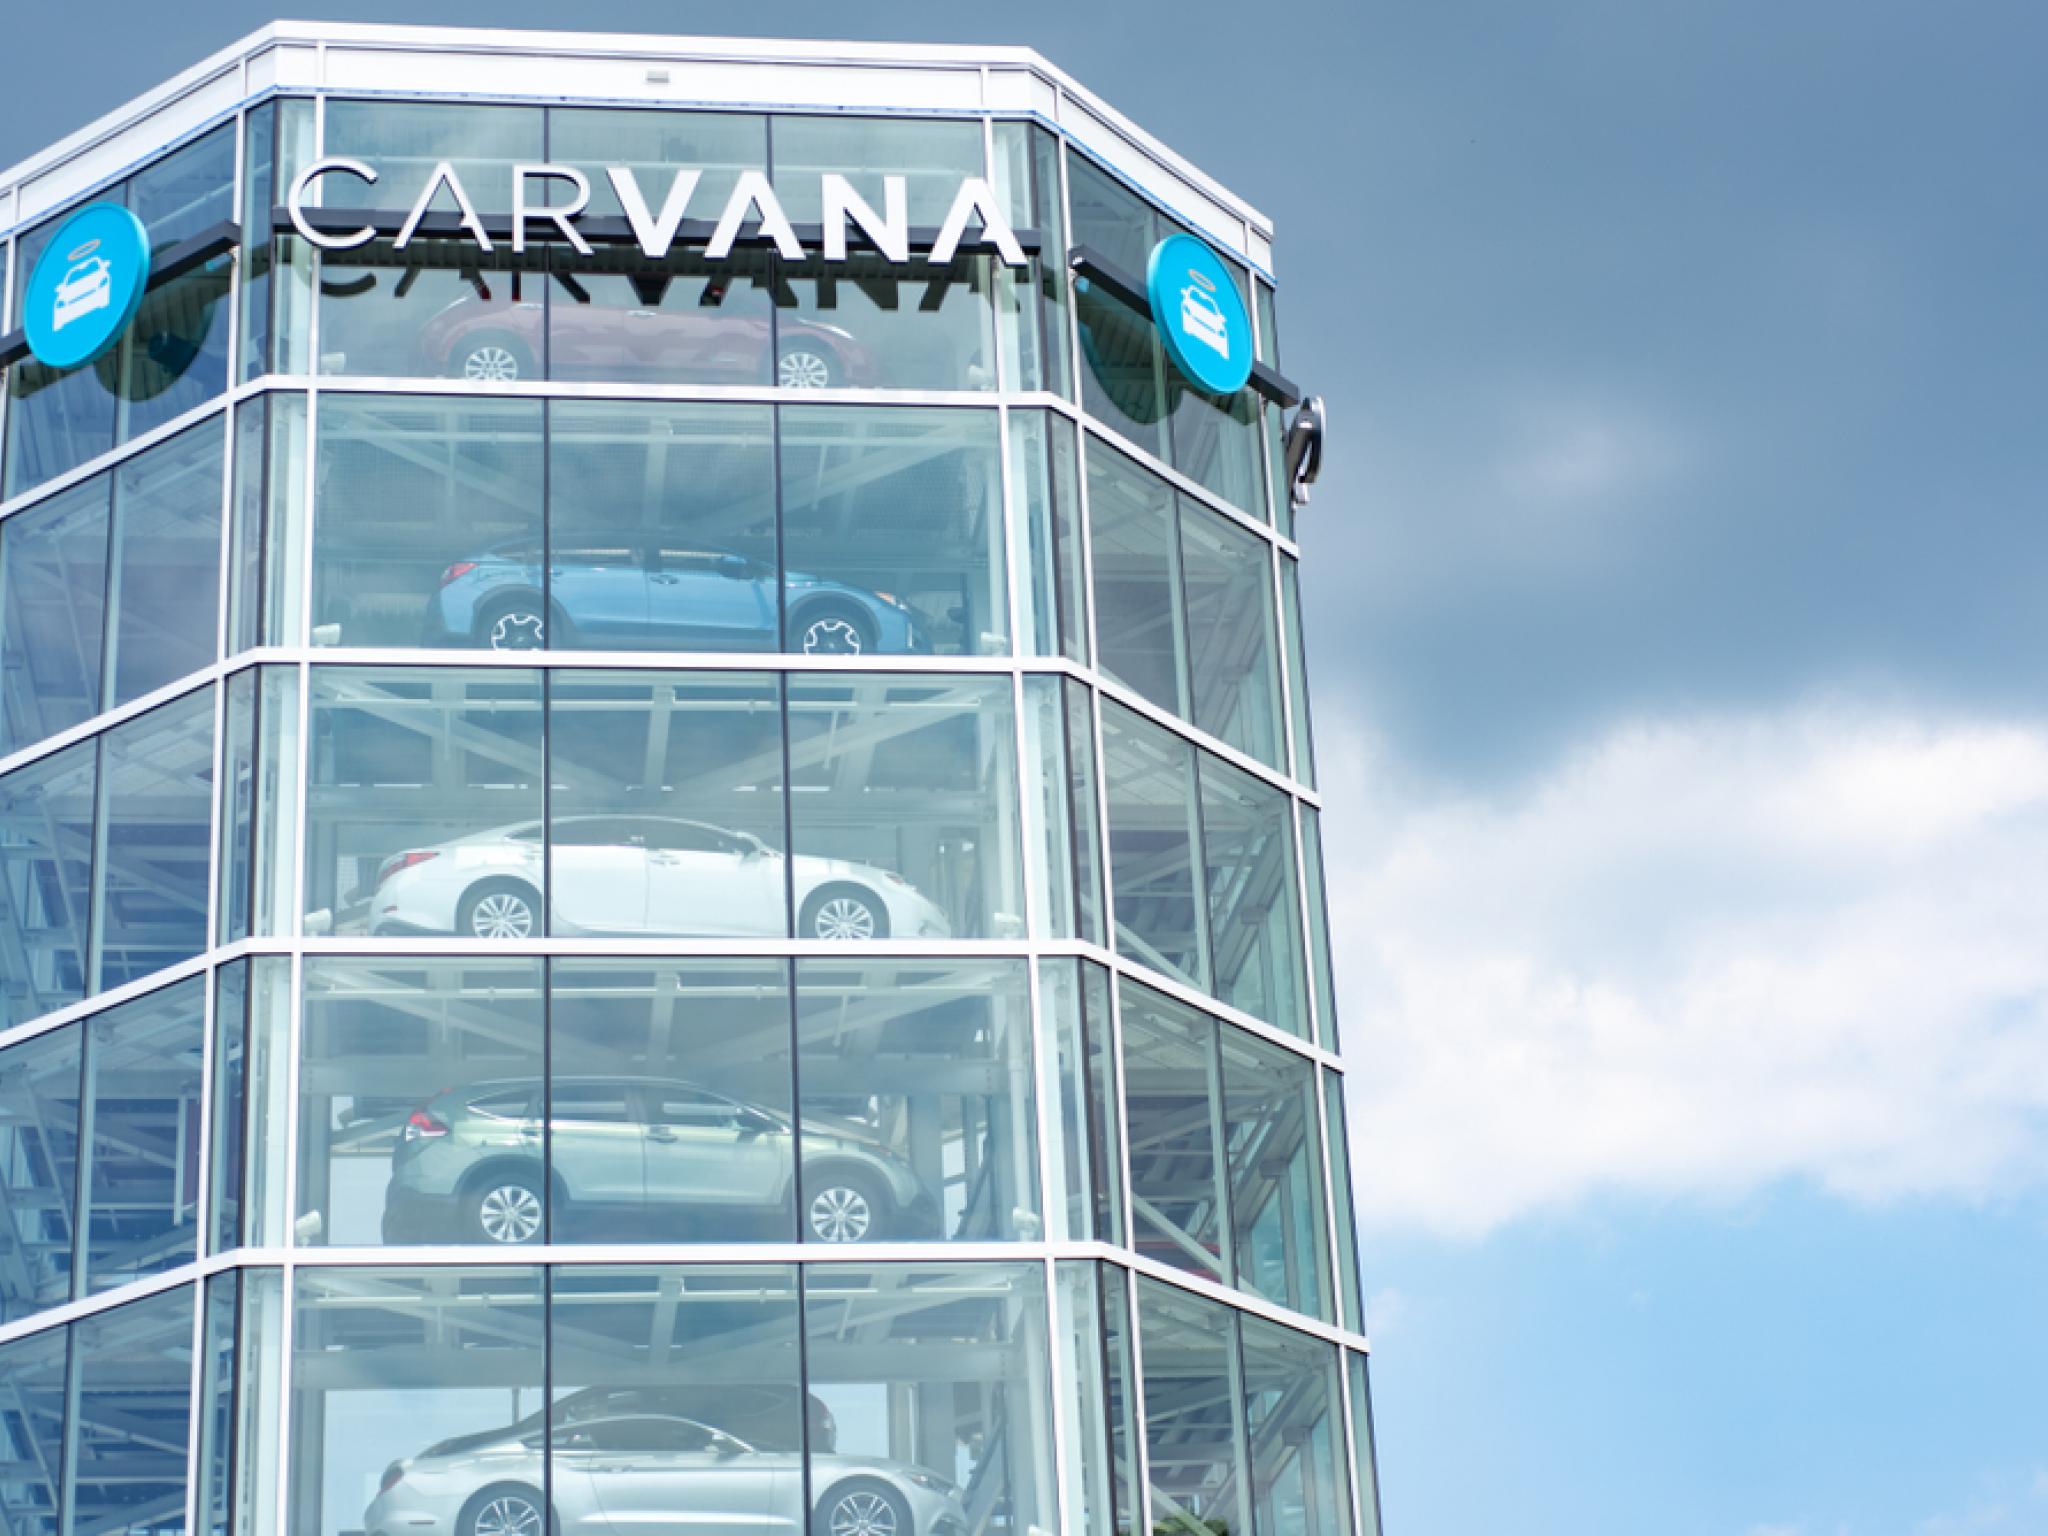  carvana-expects-surge-in-used-car-demand-on-new-vehicle-oversupply 